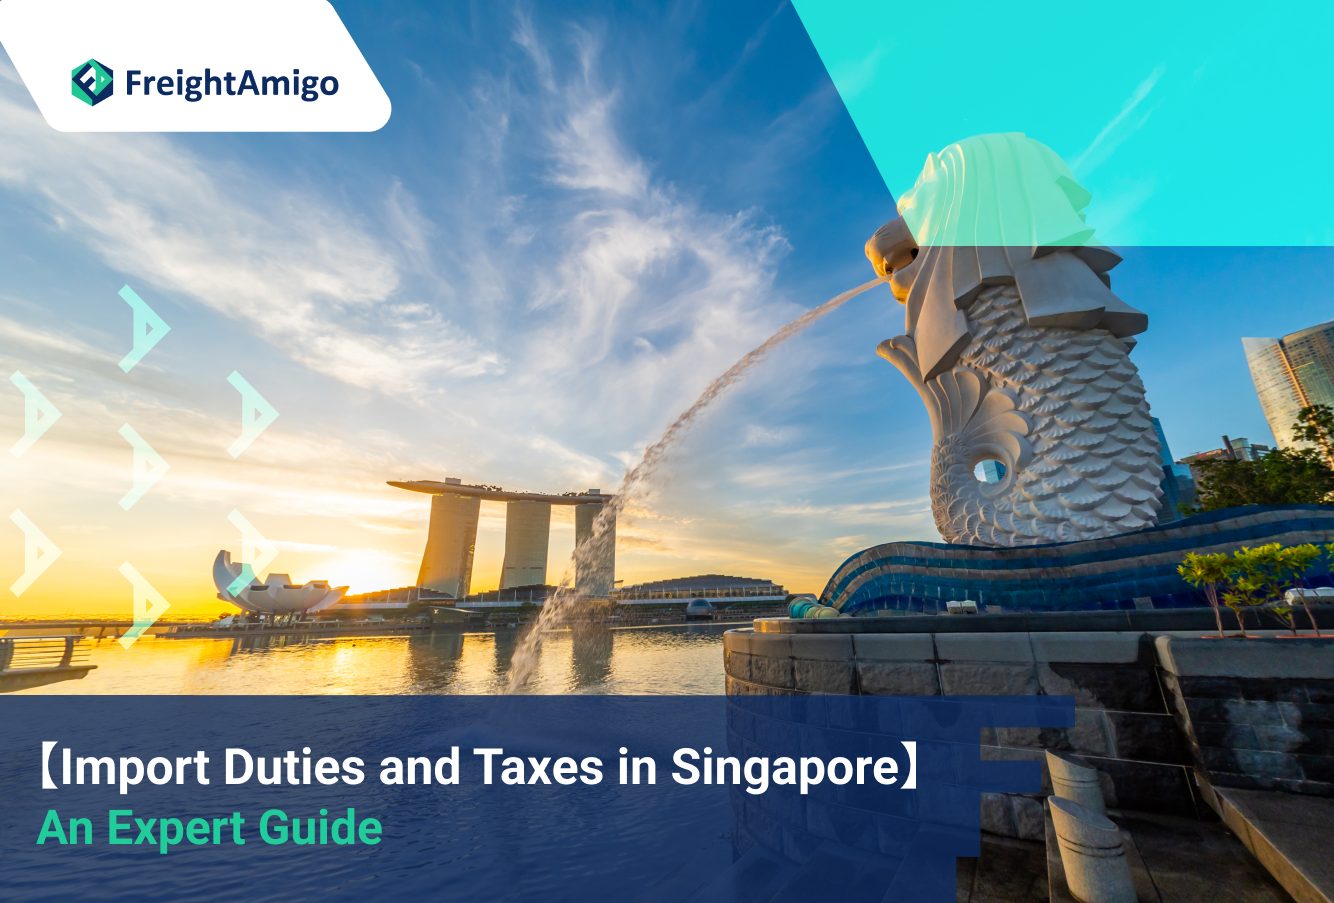 An Expert Guide to Import Duties and Taxes in Singapore